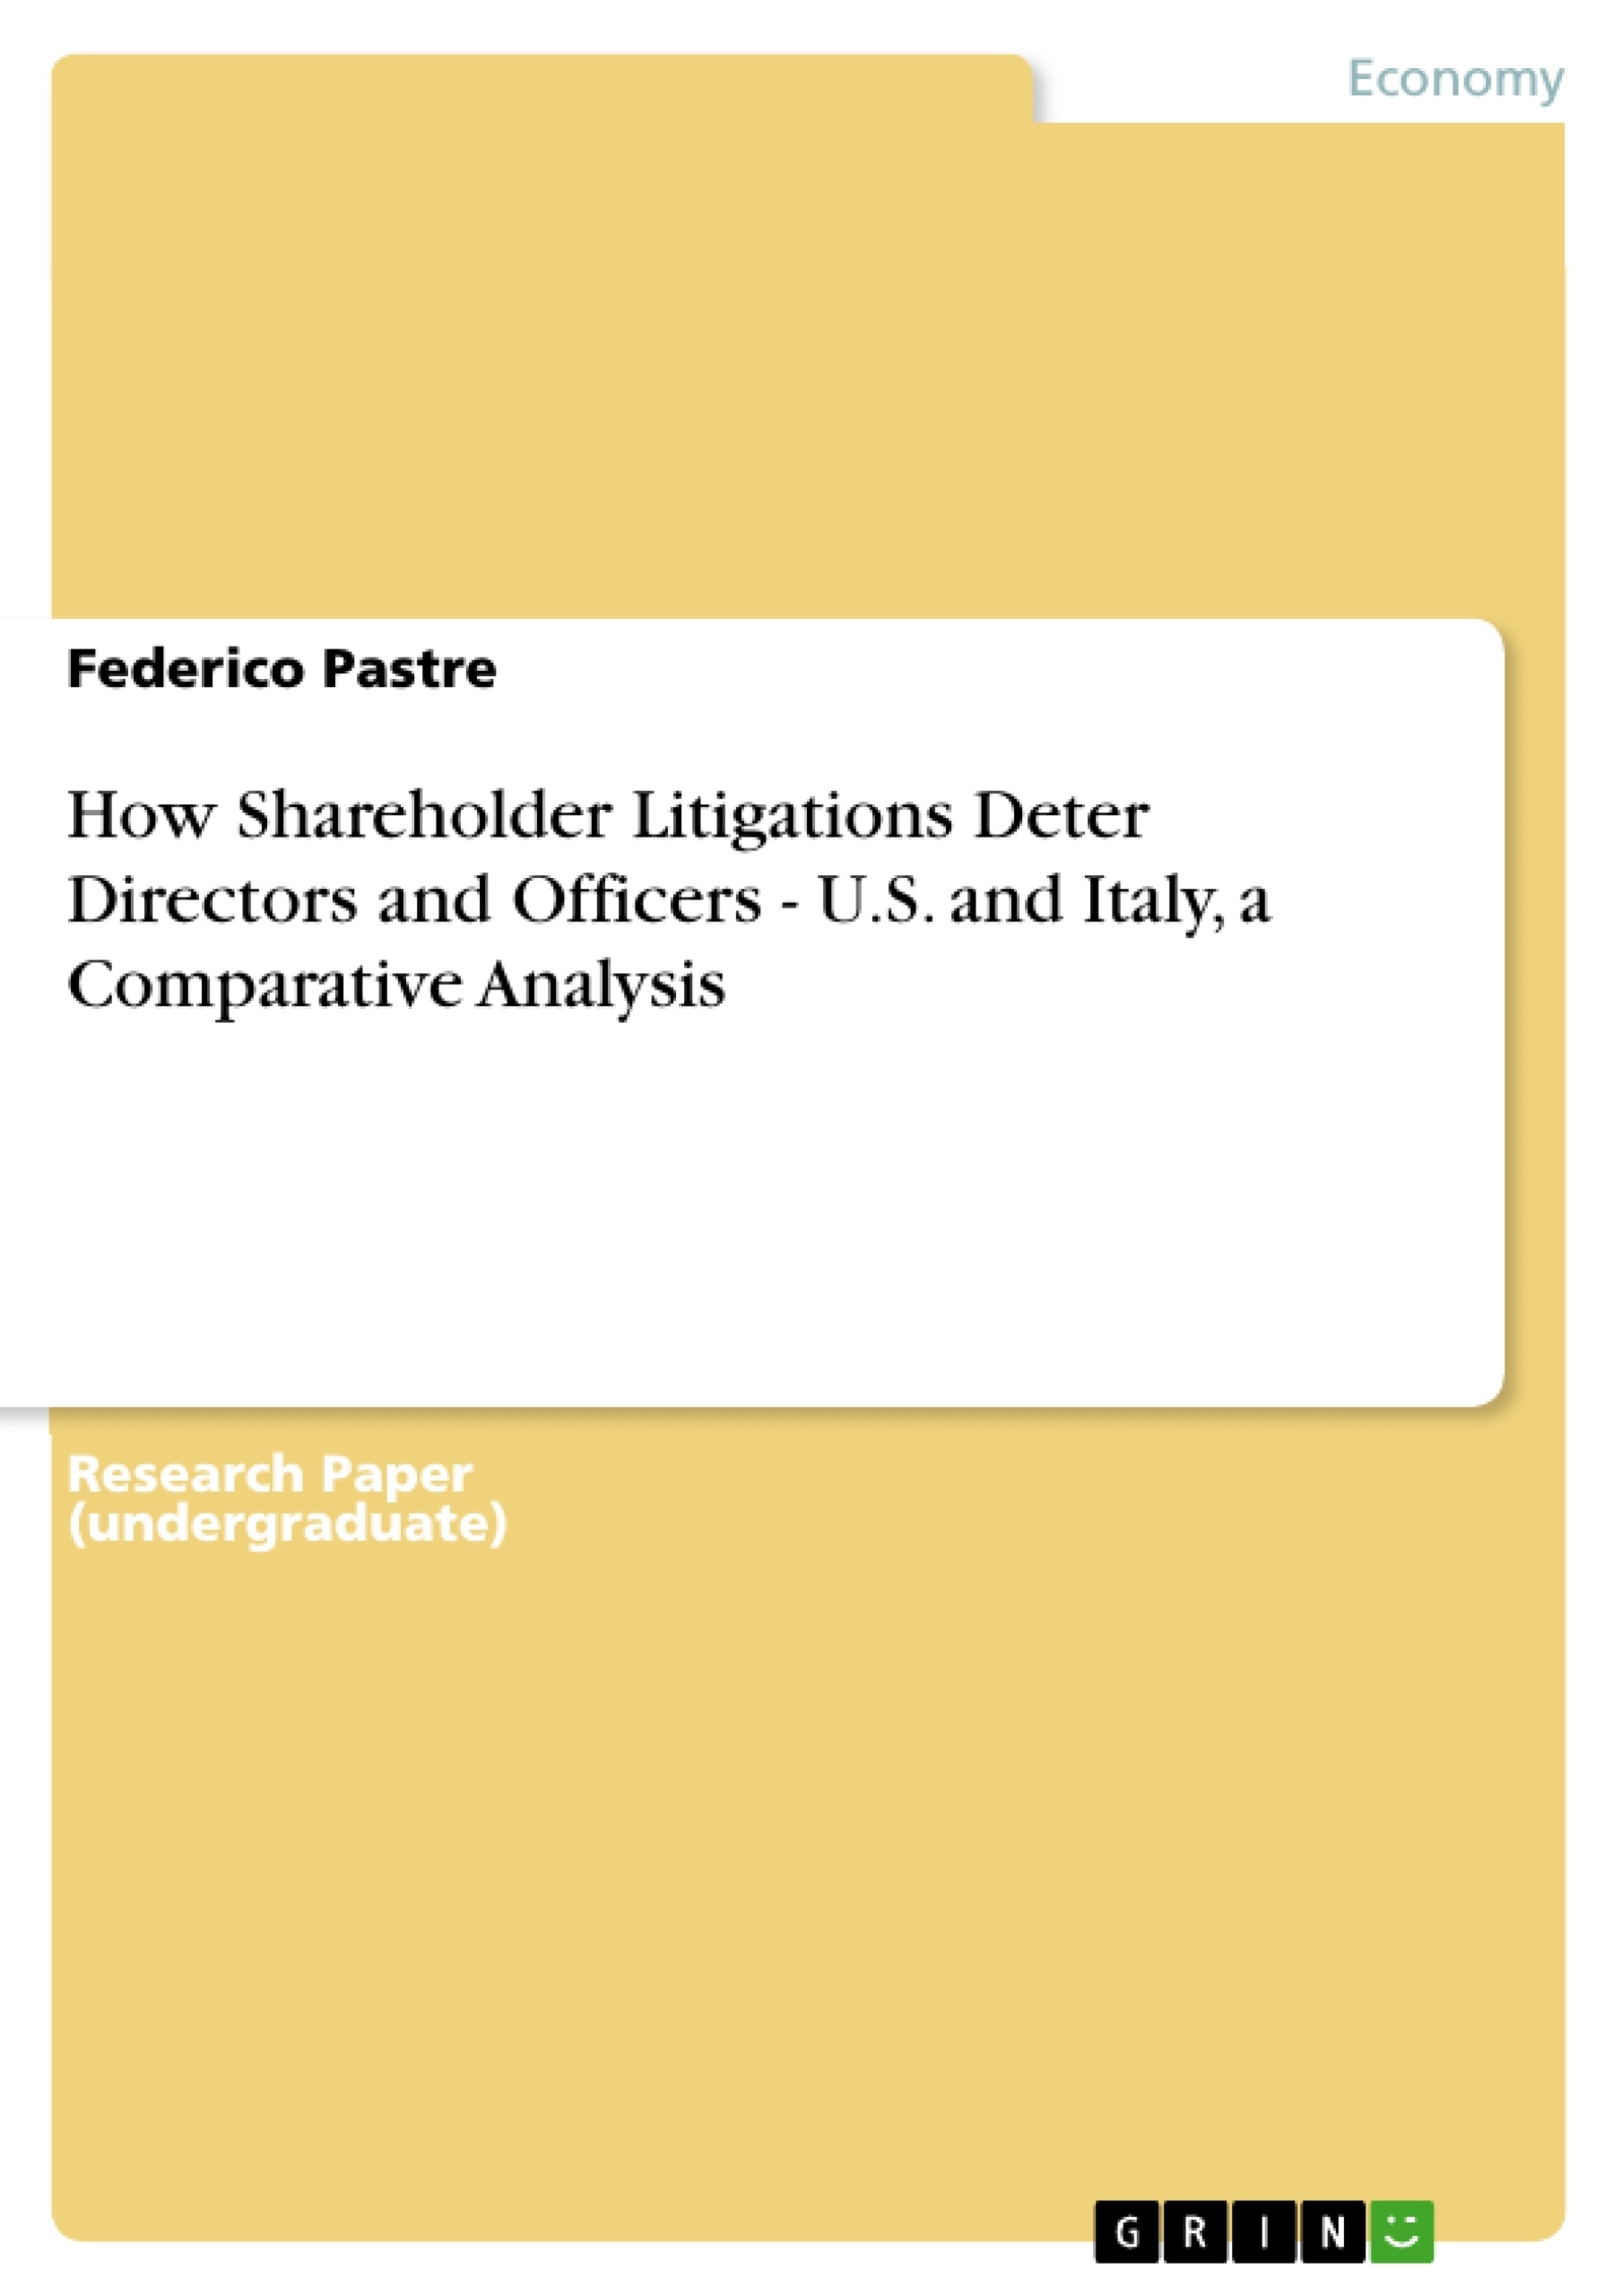 Titre: How Shareholder Litigations Deter Directors and Officers - U.S. and Italy, a Comparative Analysis